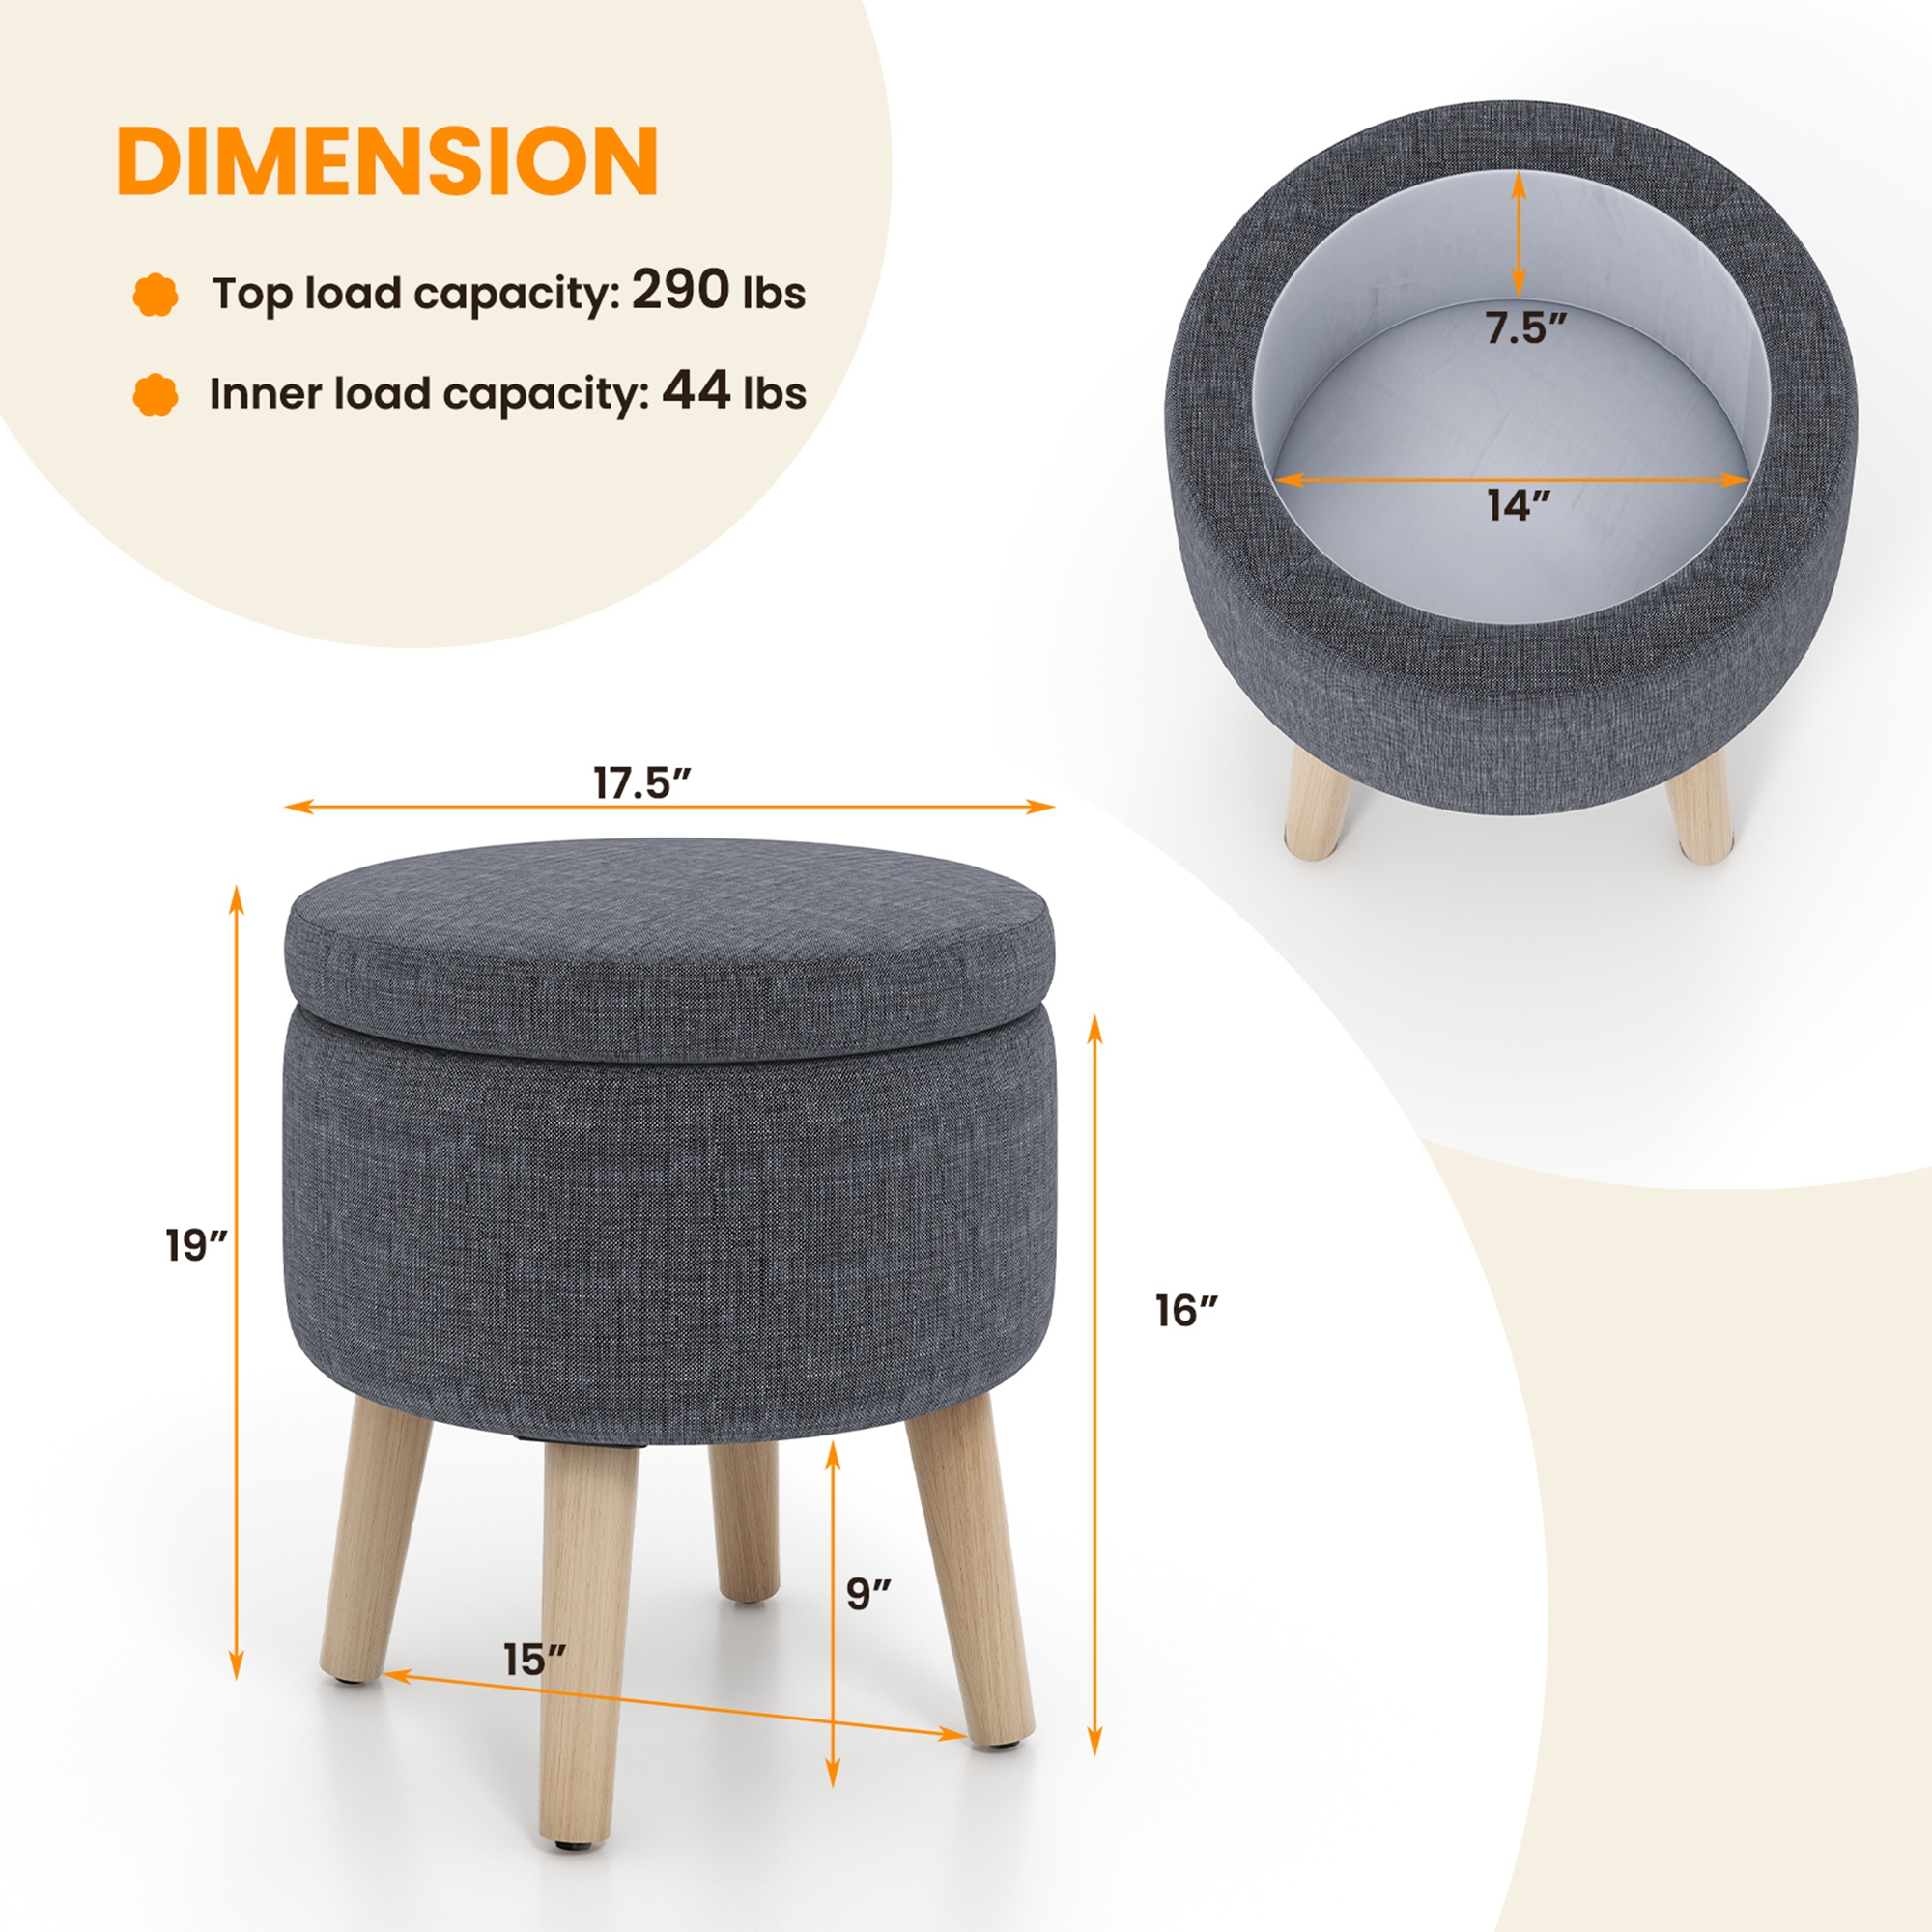 Costway Round Storage Ottoman Accent Storage Footstool with Tray for Living Room Bedroom Grey - image 3 of 10